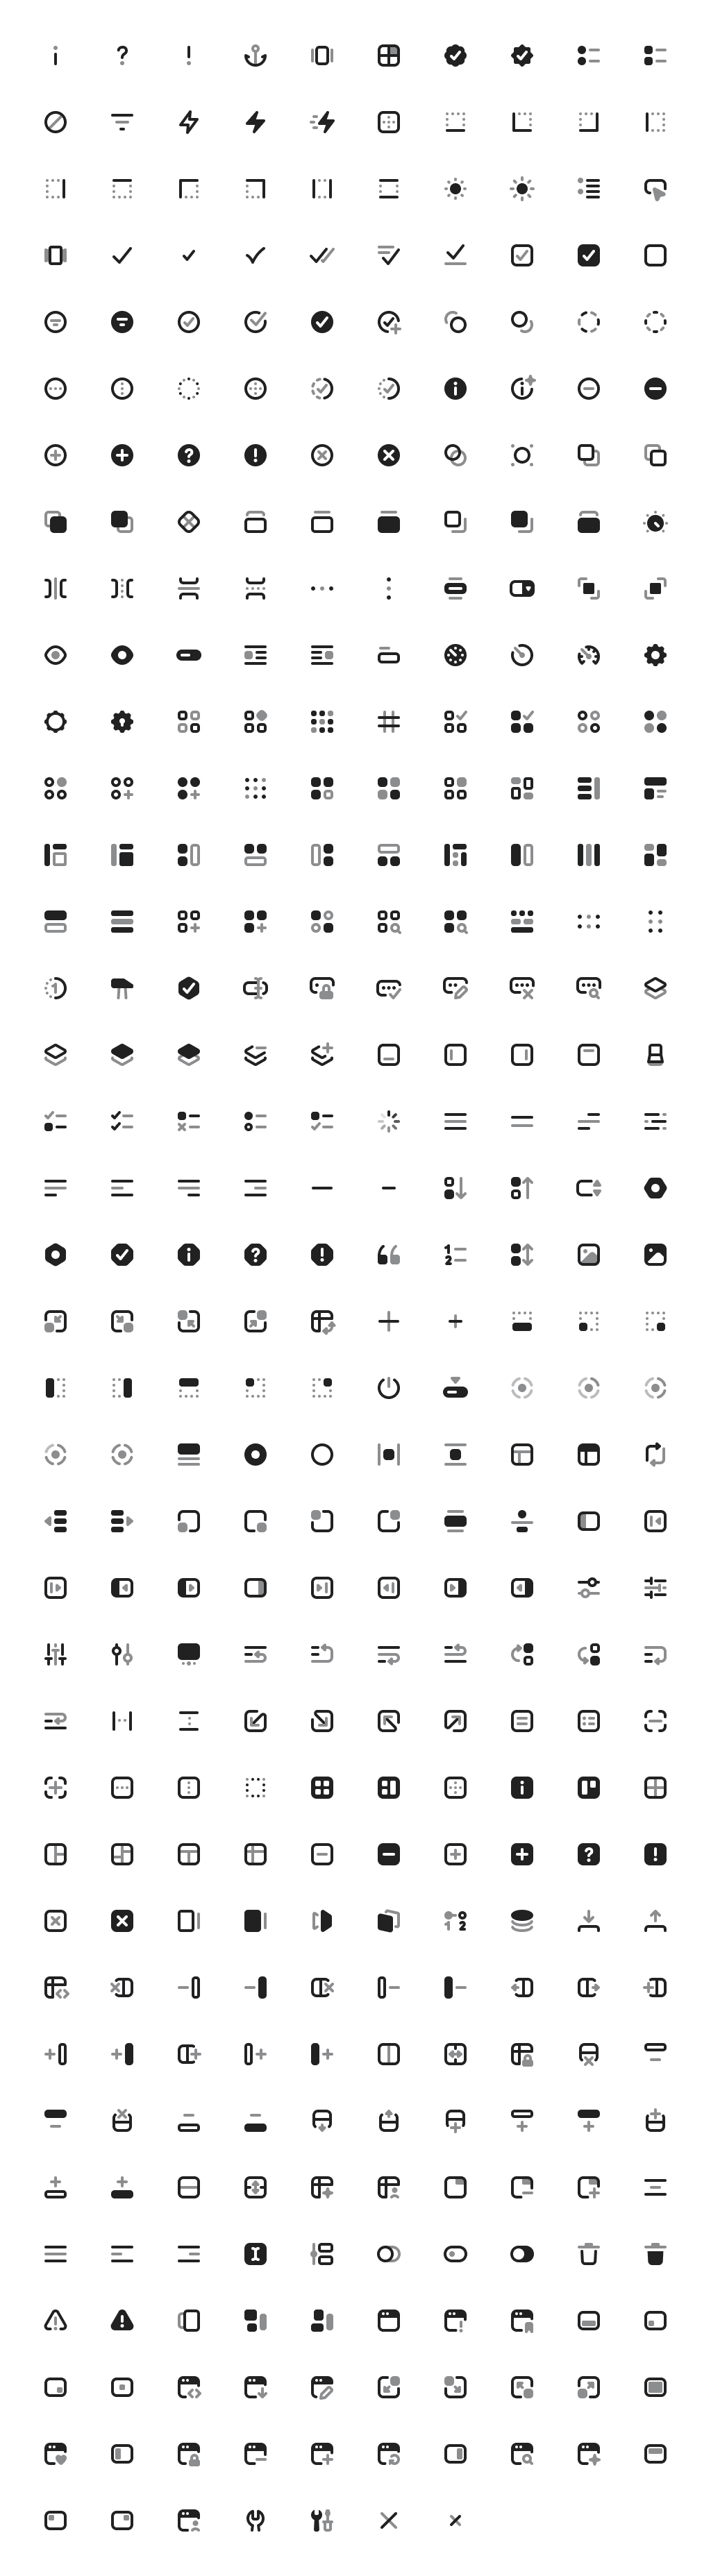 User Interface icons